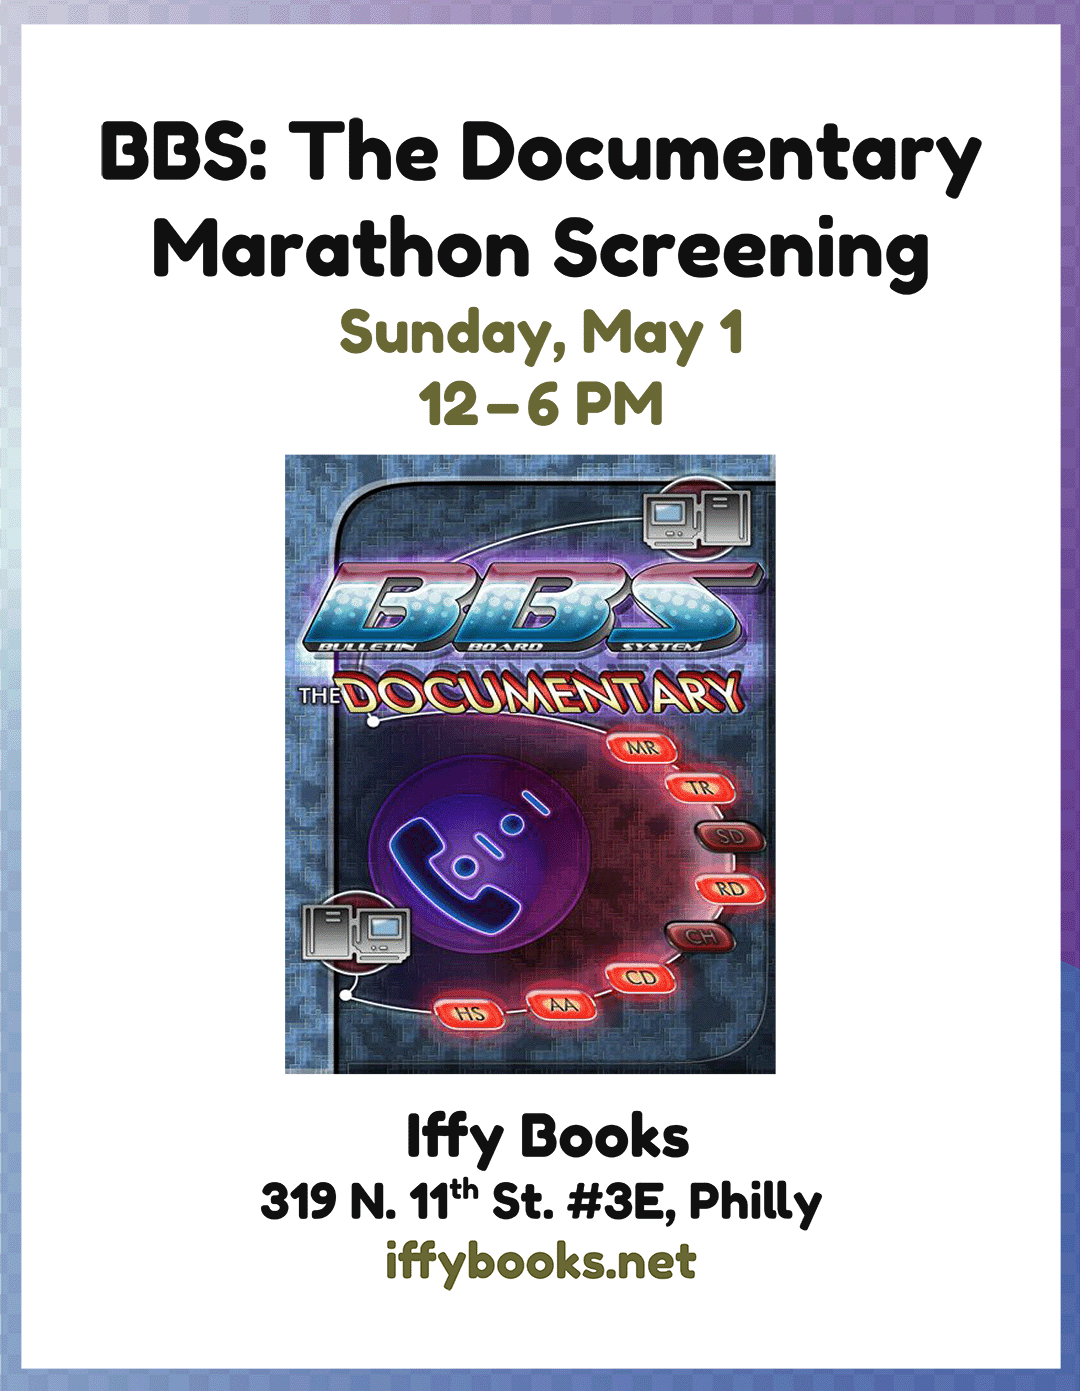 Flyer with the following text: BBS: The Documentary / Marathon Screening / Sunday, May 1 / 12-6 PM [DVD cover for BBS: The Documentary] / Iffy Books / 319 N. 11th St. #3E, Philly / iffybooks.net